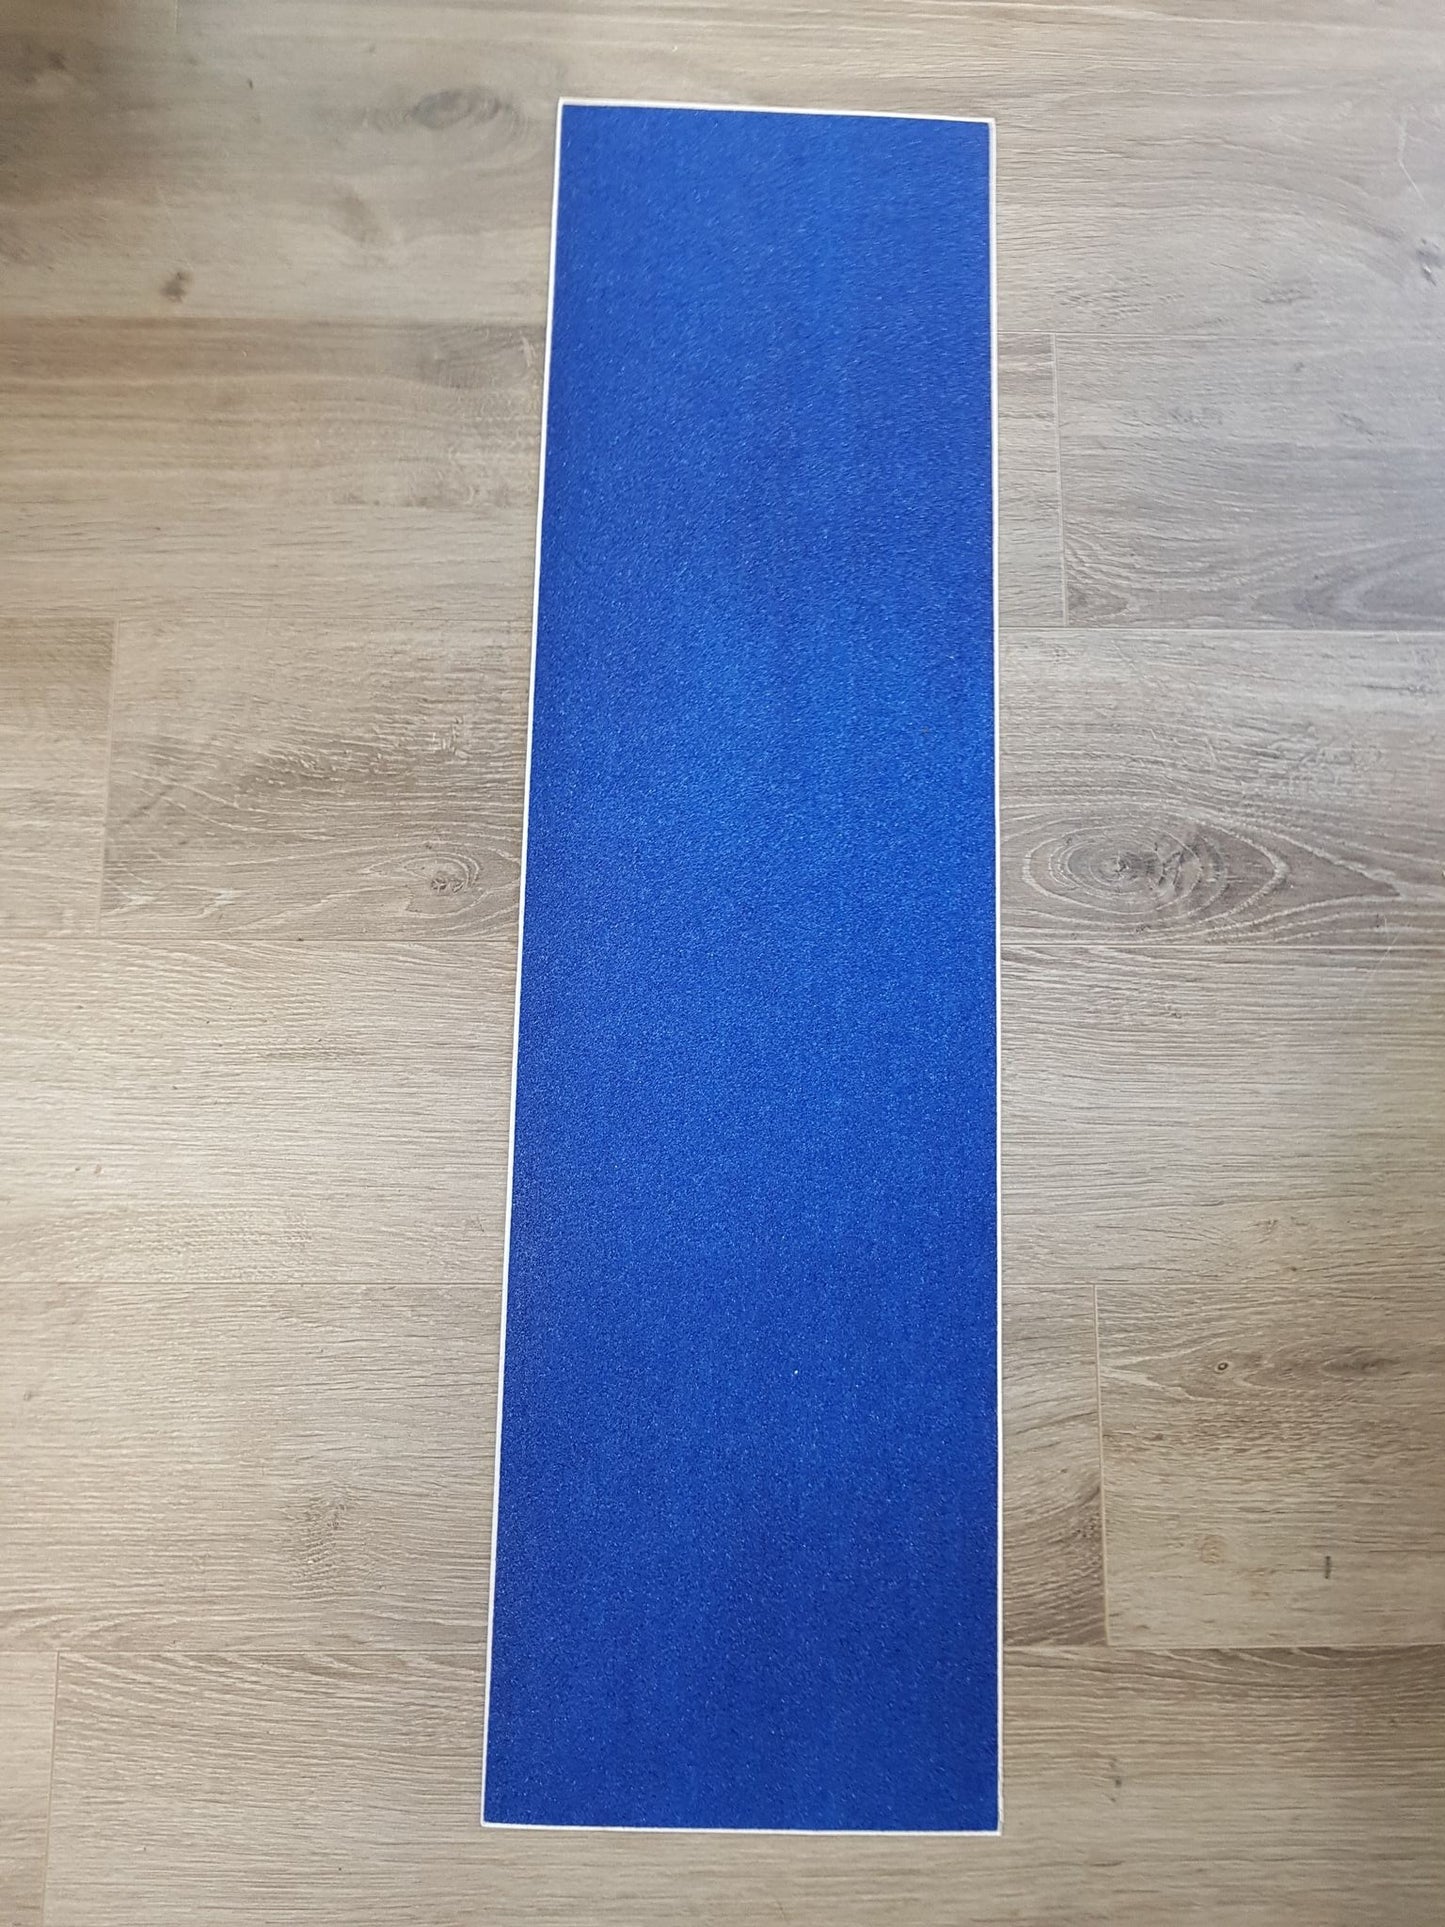 This is very Blue Griptape.